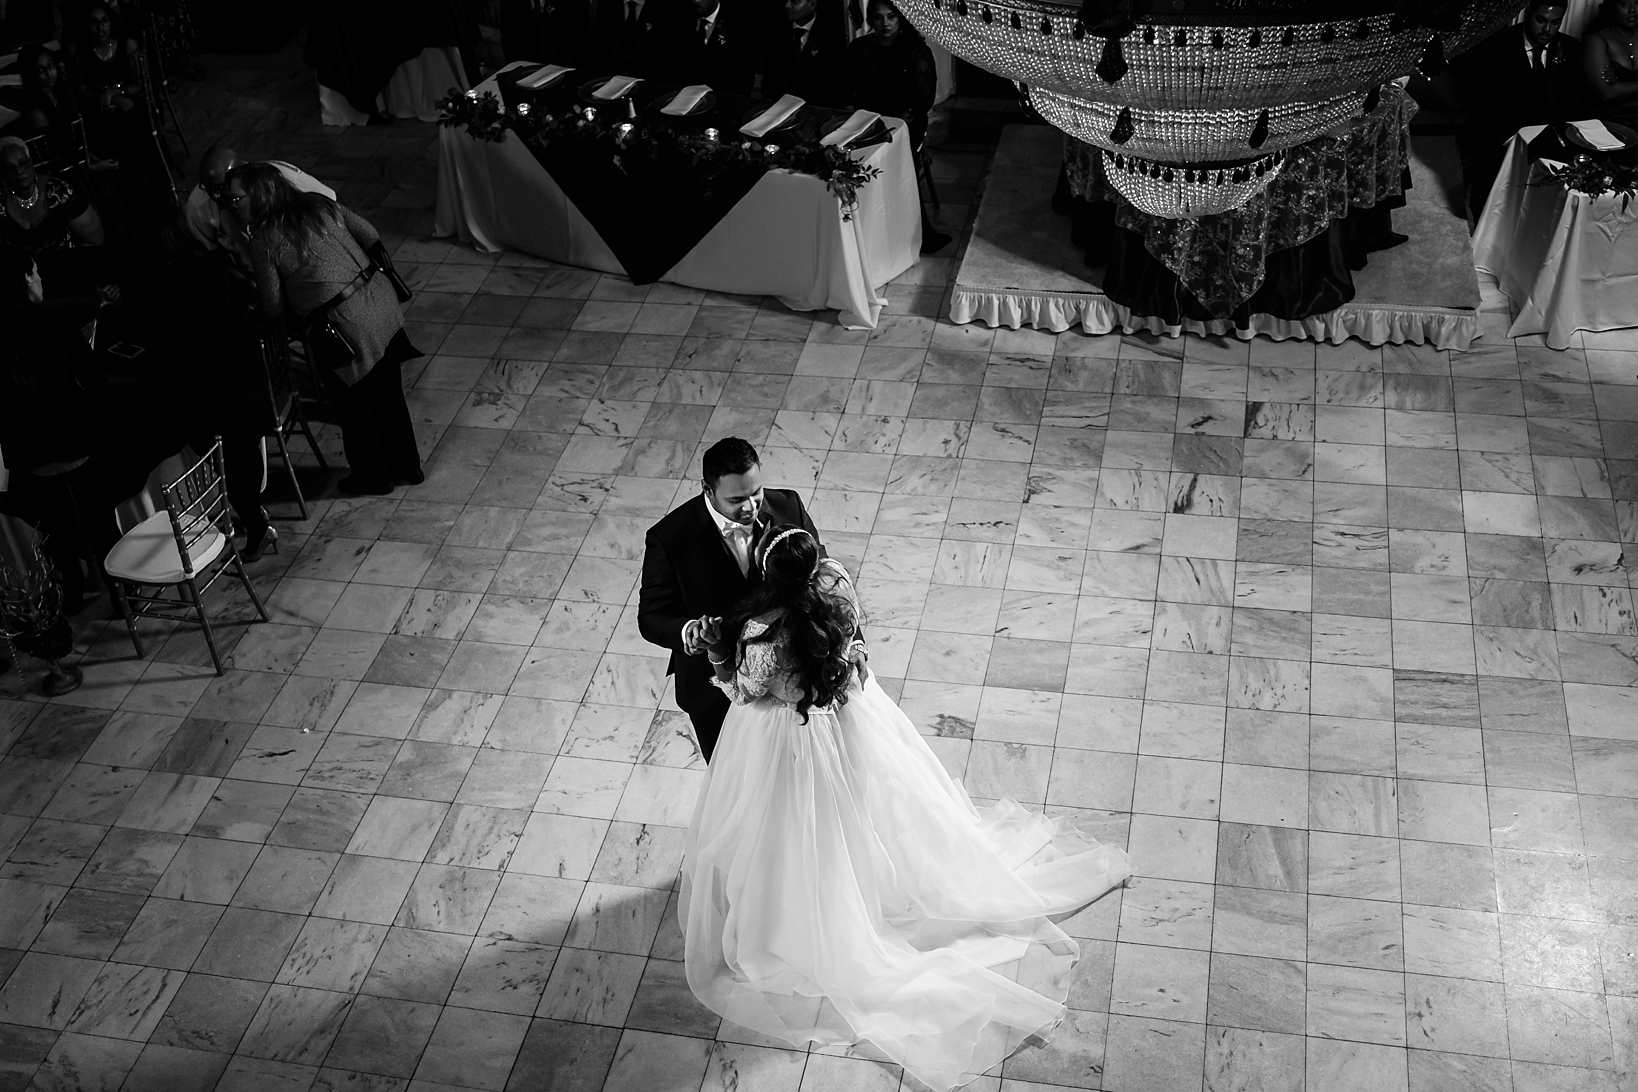 The Bride and Groom share their first dance in this fairy tale setting in black and white by Sarah & Ben Photography